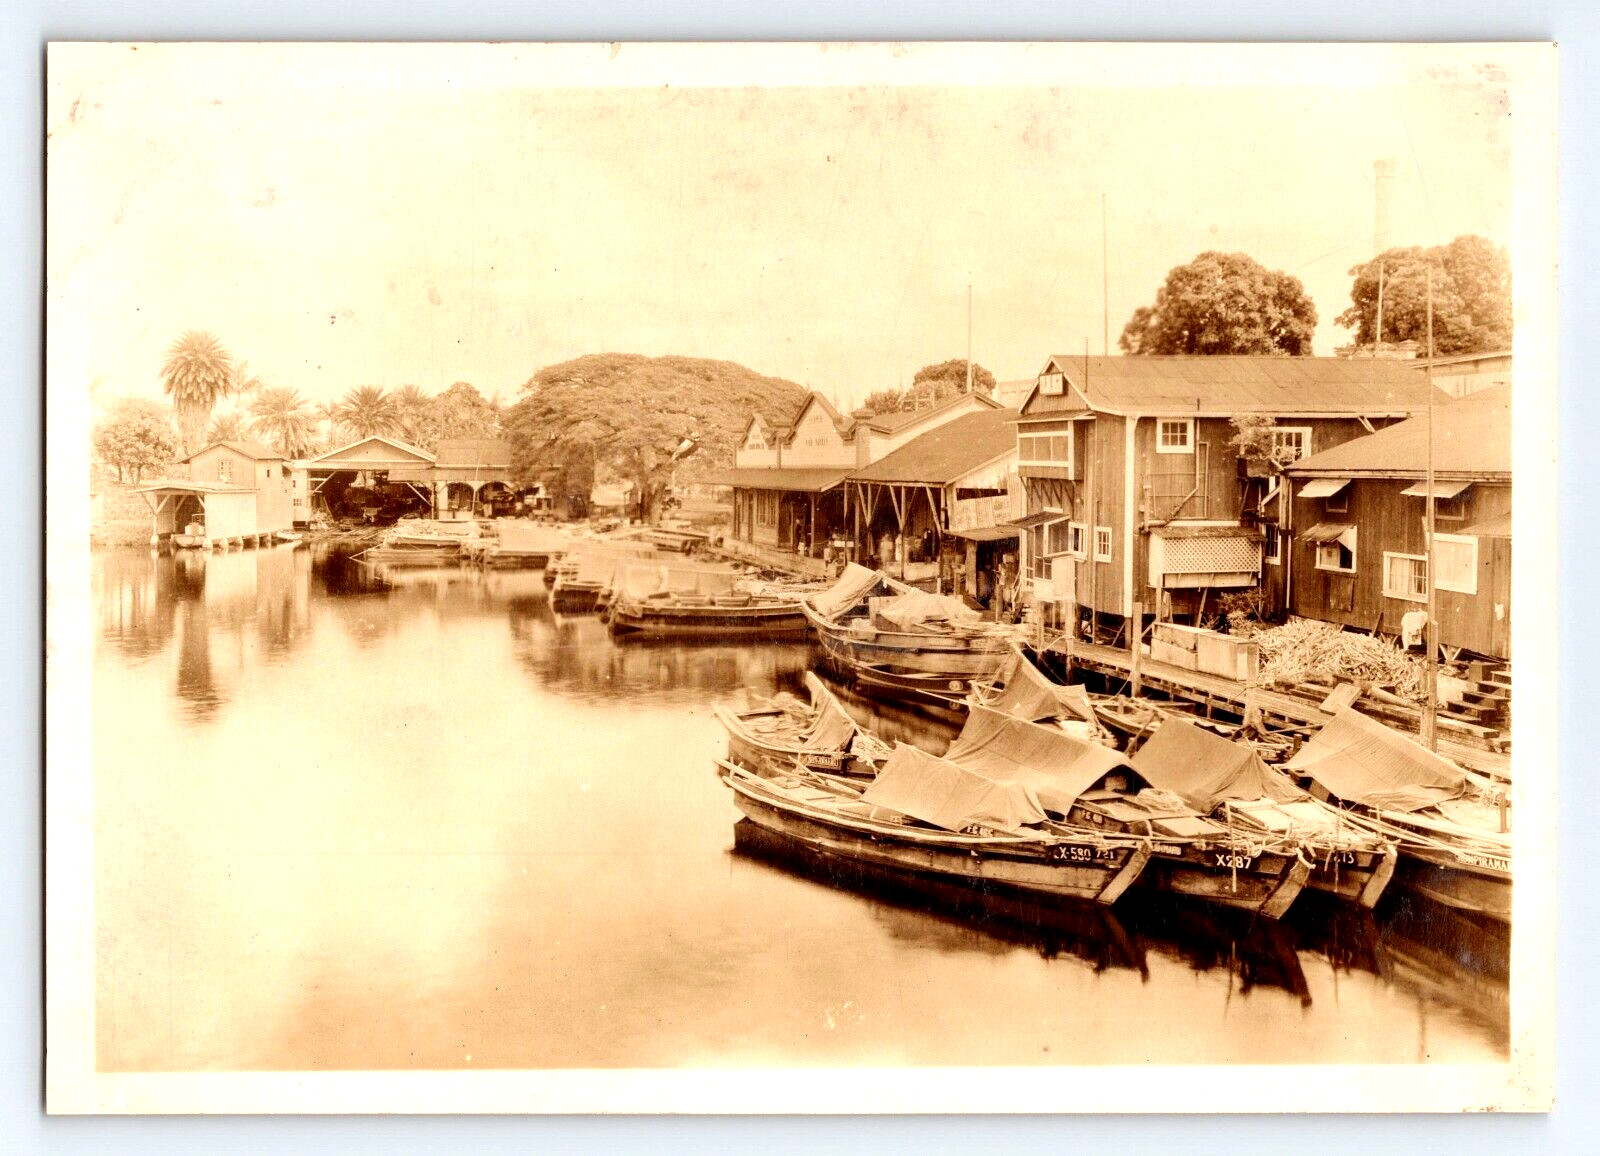 Vintage sepia photograph 5x7 inch Fishing Boats at unknown location